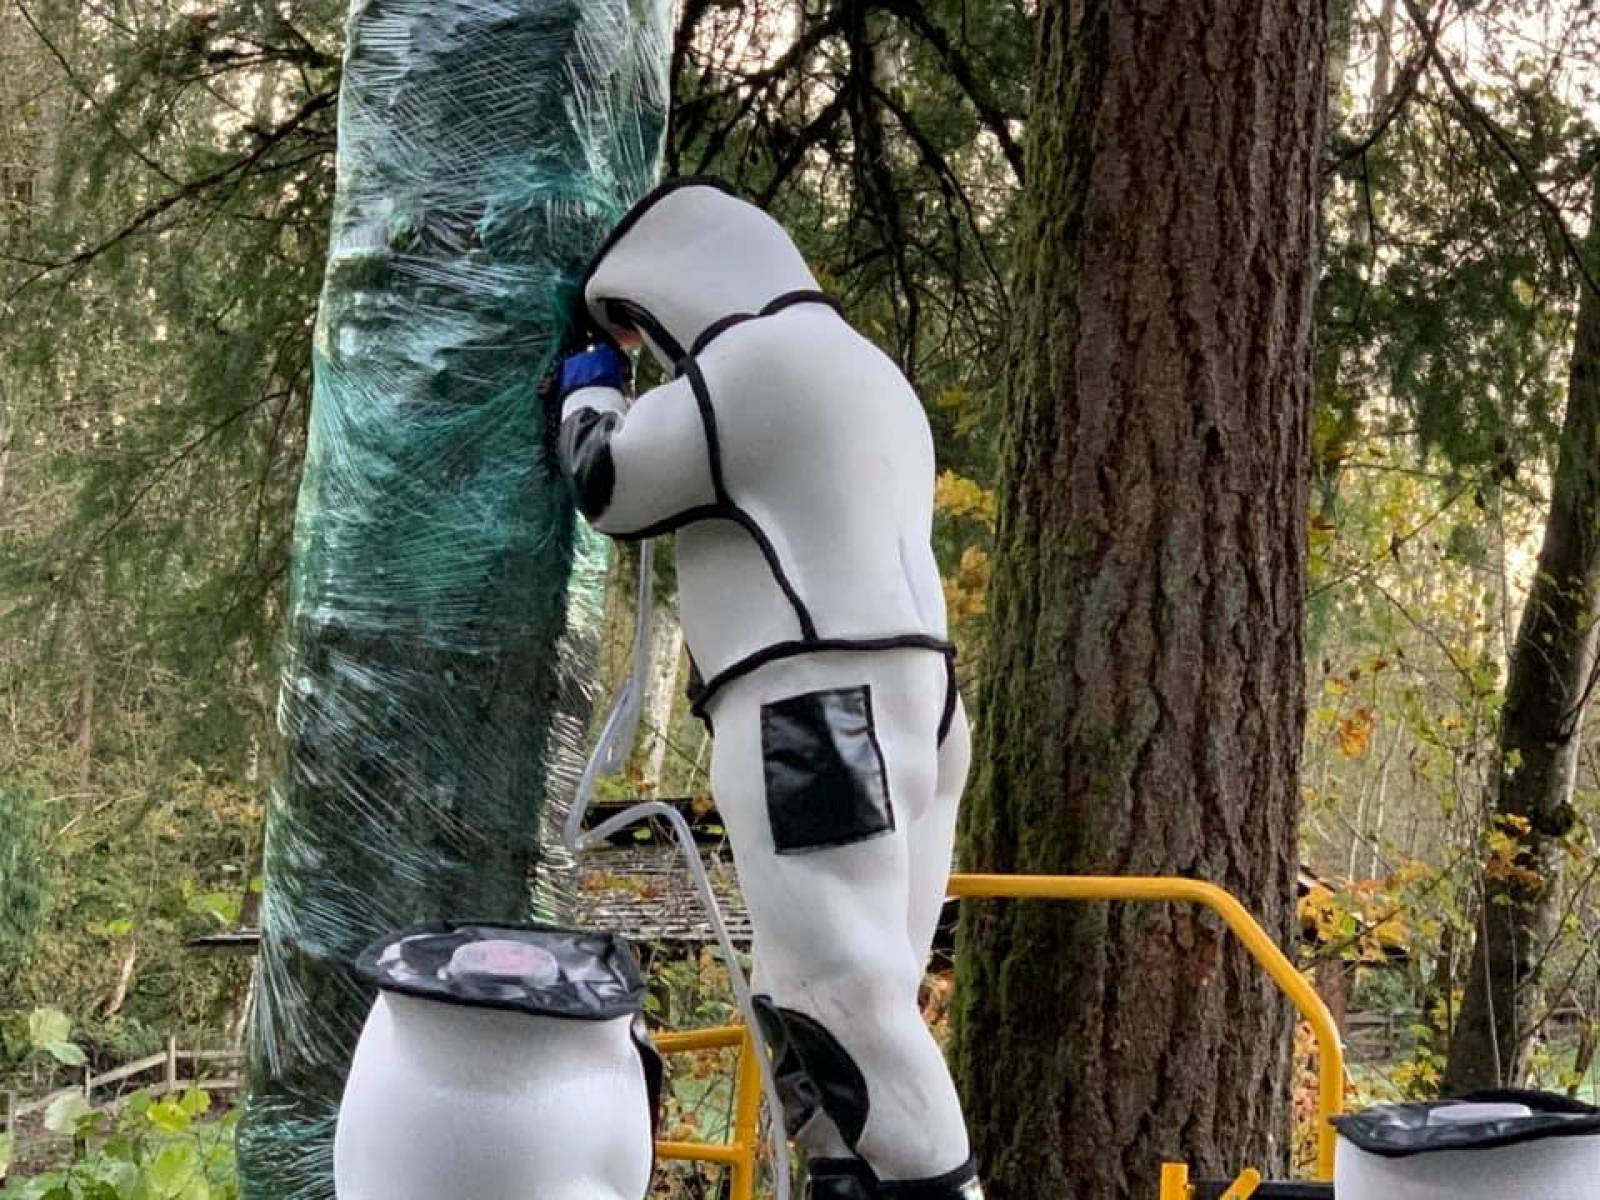 Washington State Department of Agriculture entomologist completes an operation to vacuum a colony of Asian giant hornets in Blaine